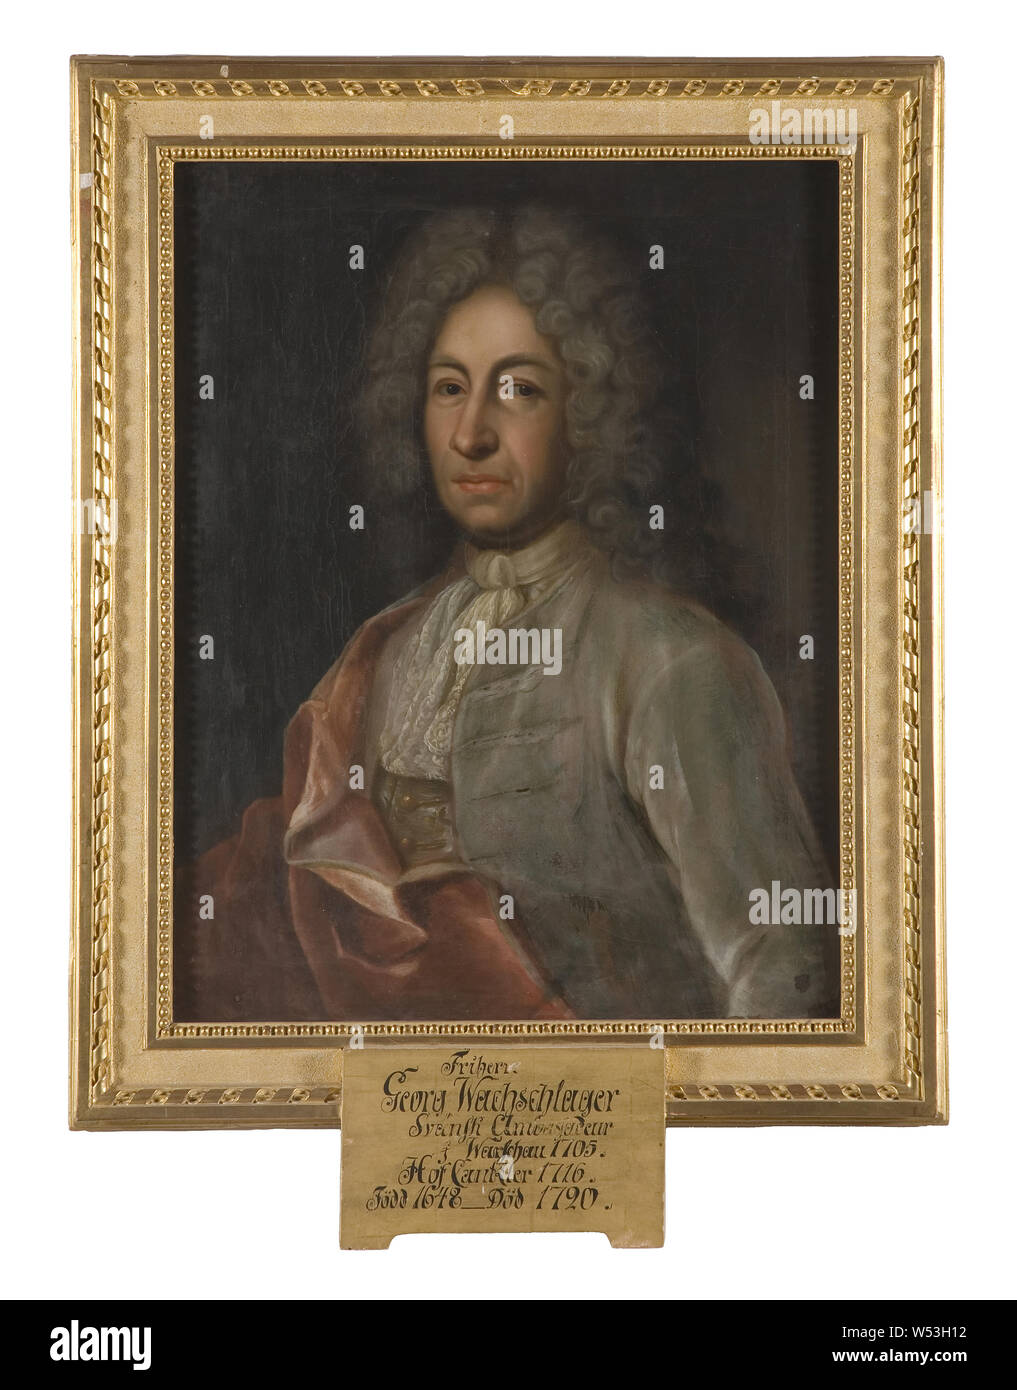 Georg Wachschlager, 1648-1720, painting, oil on canvas, Framed, Height, 90 cm (35.4 inches), Width, 67 cm (26.3 inches), Depth, 5 cm (1.9 inches) Stock Photo